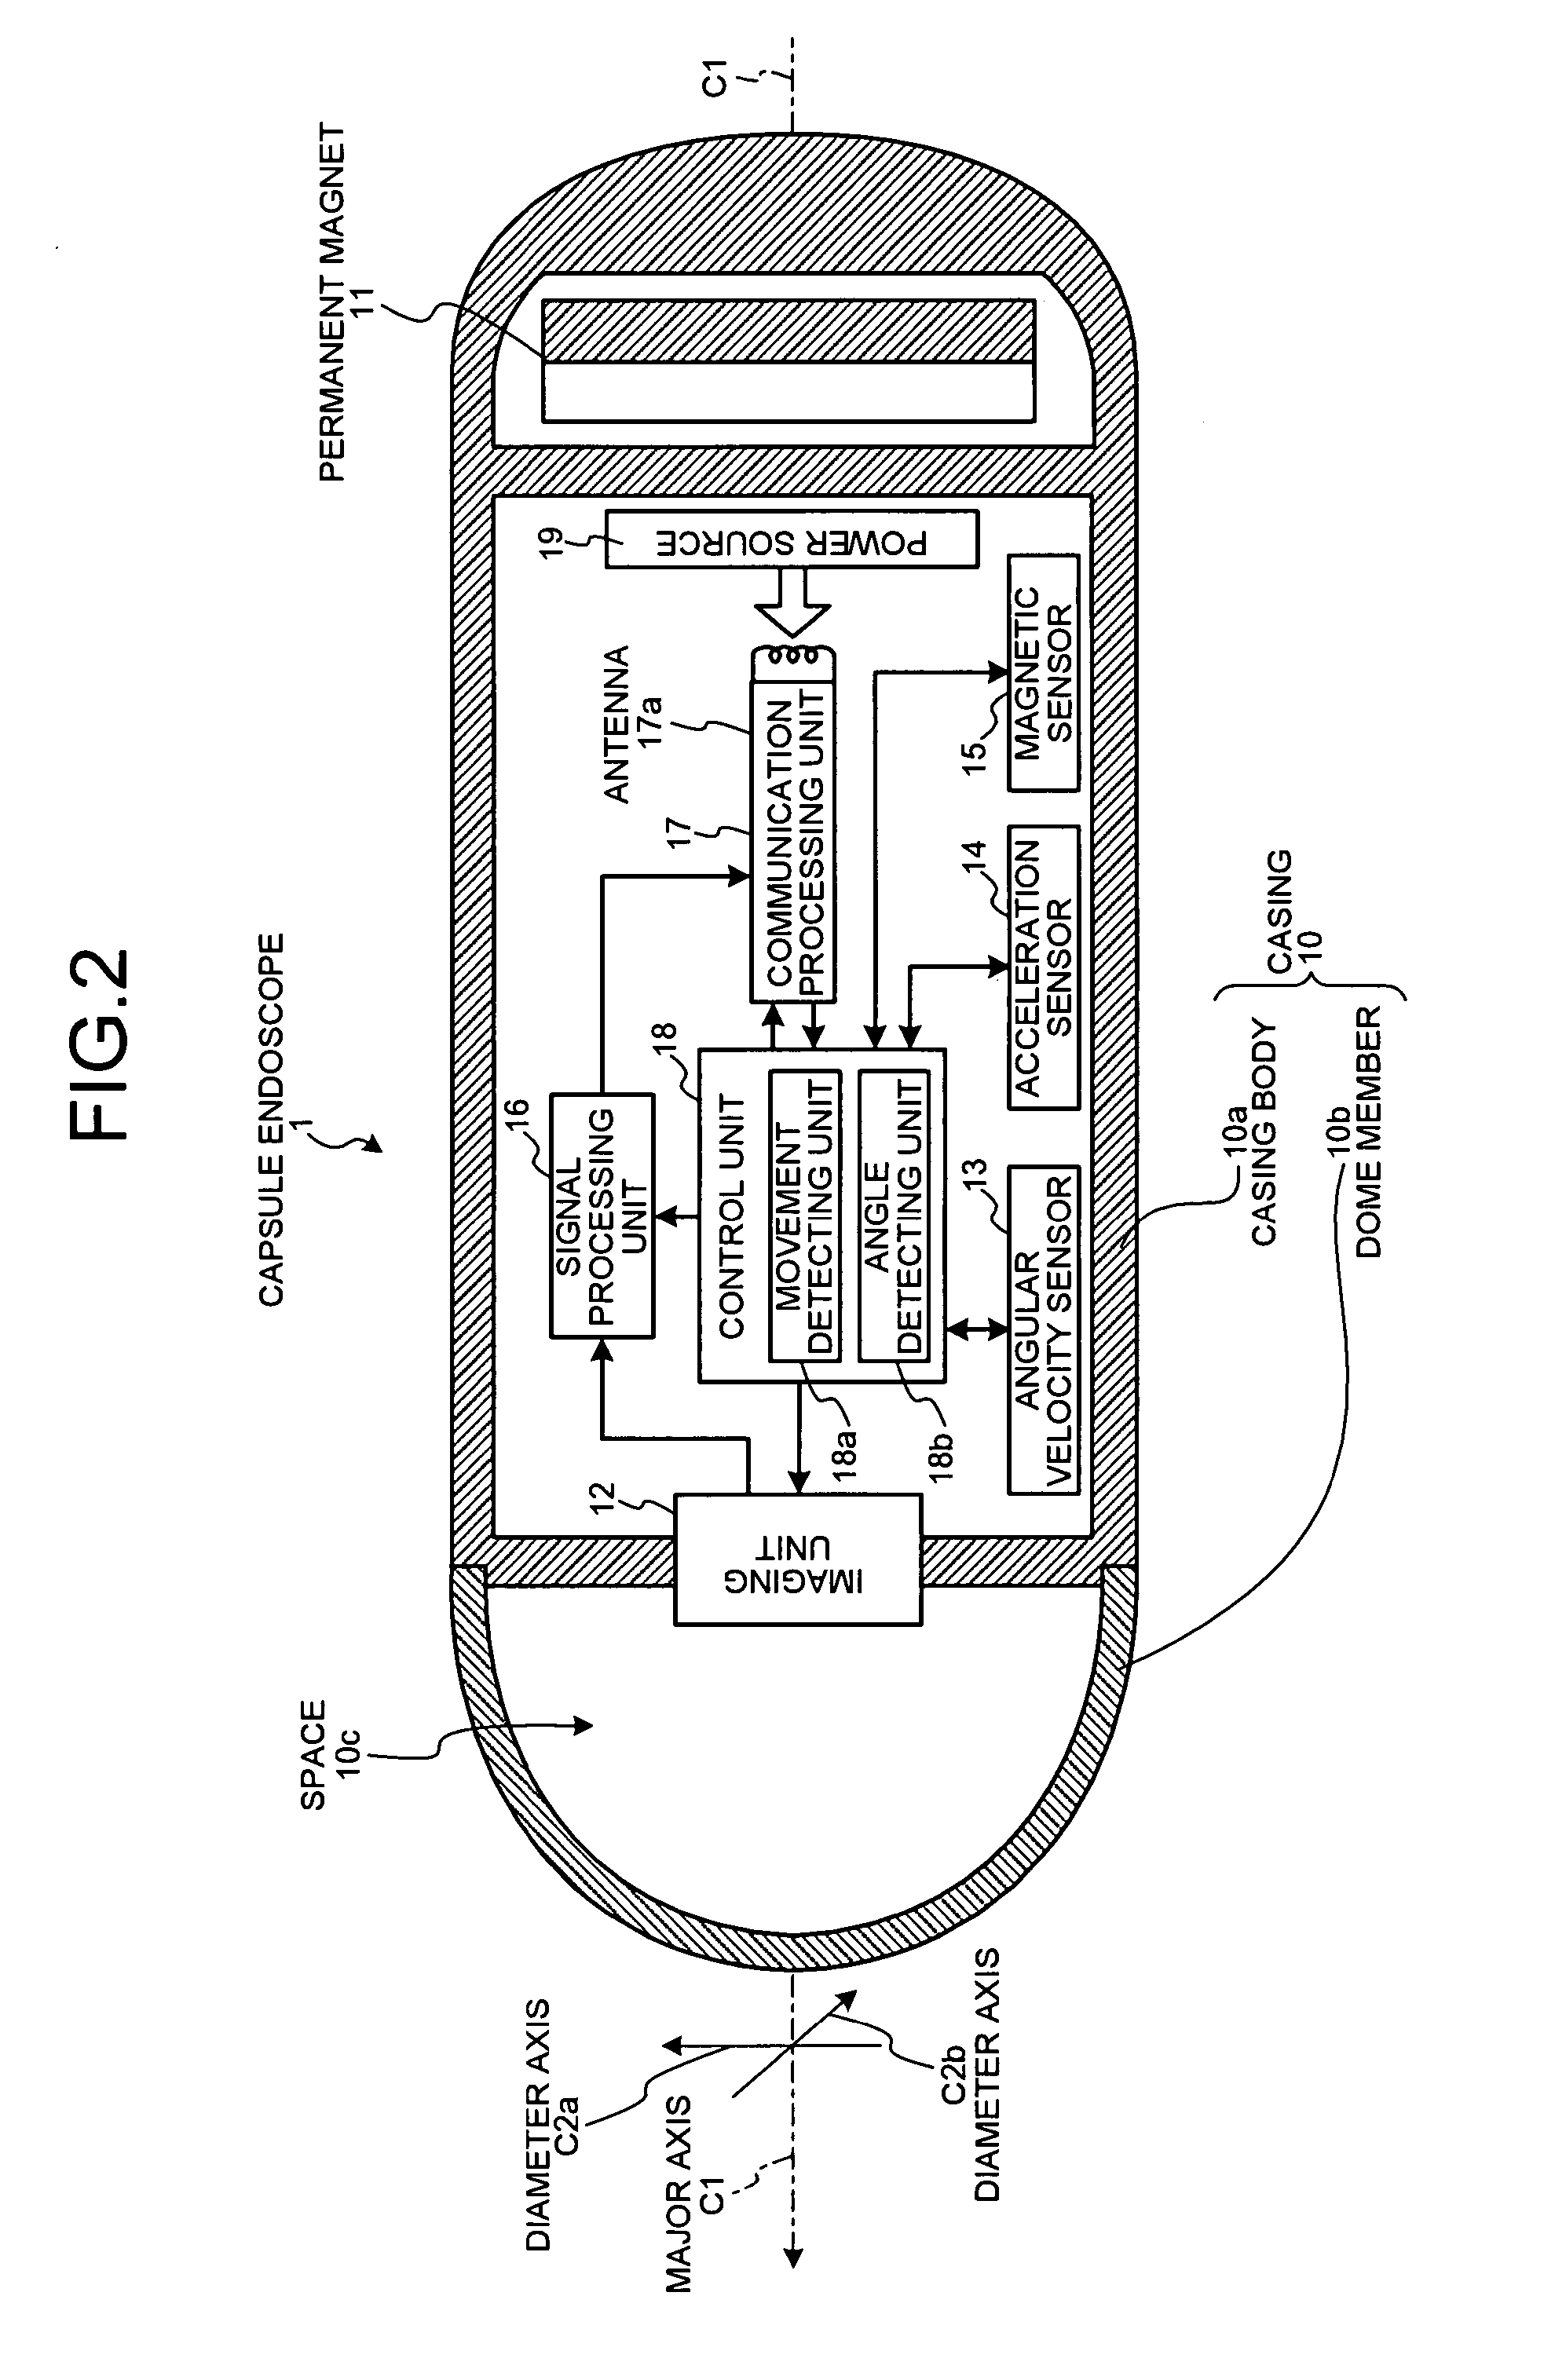 Body-insertable device system and body-insertable device guiding method